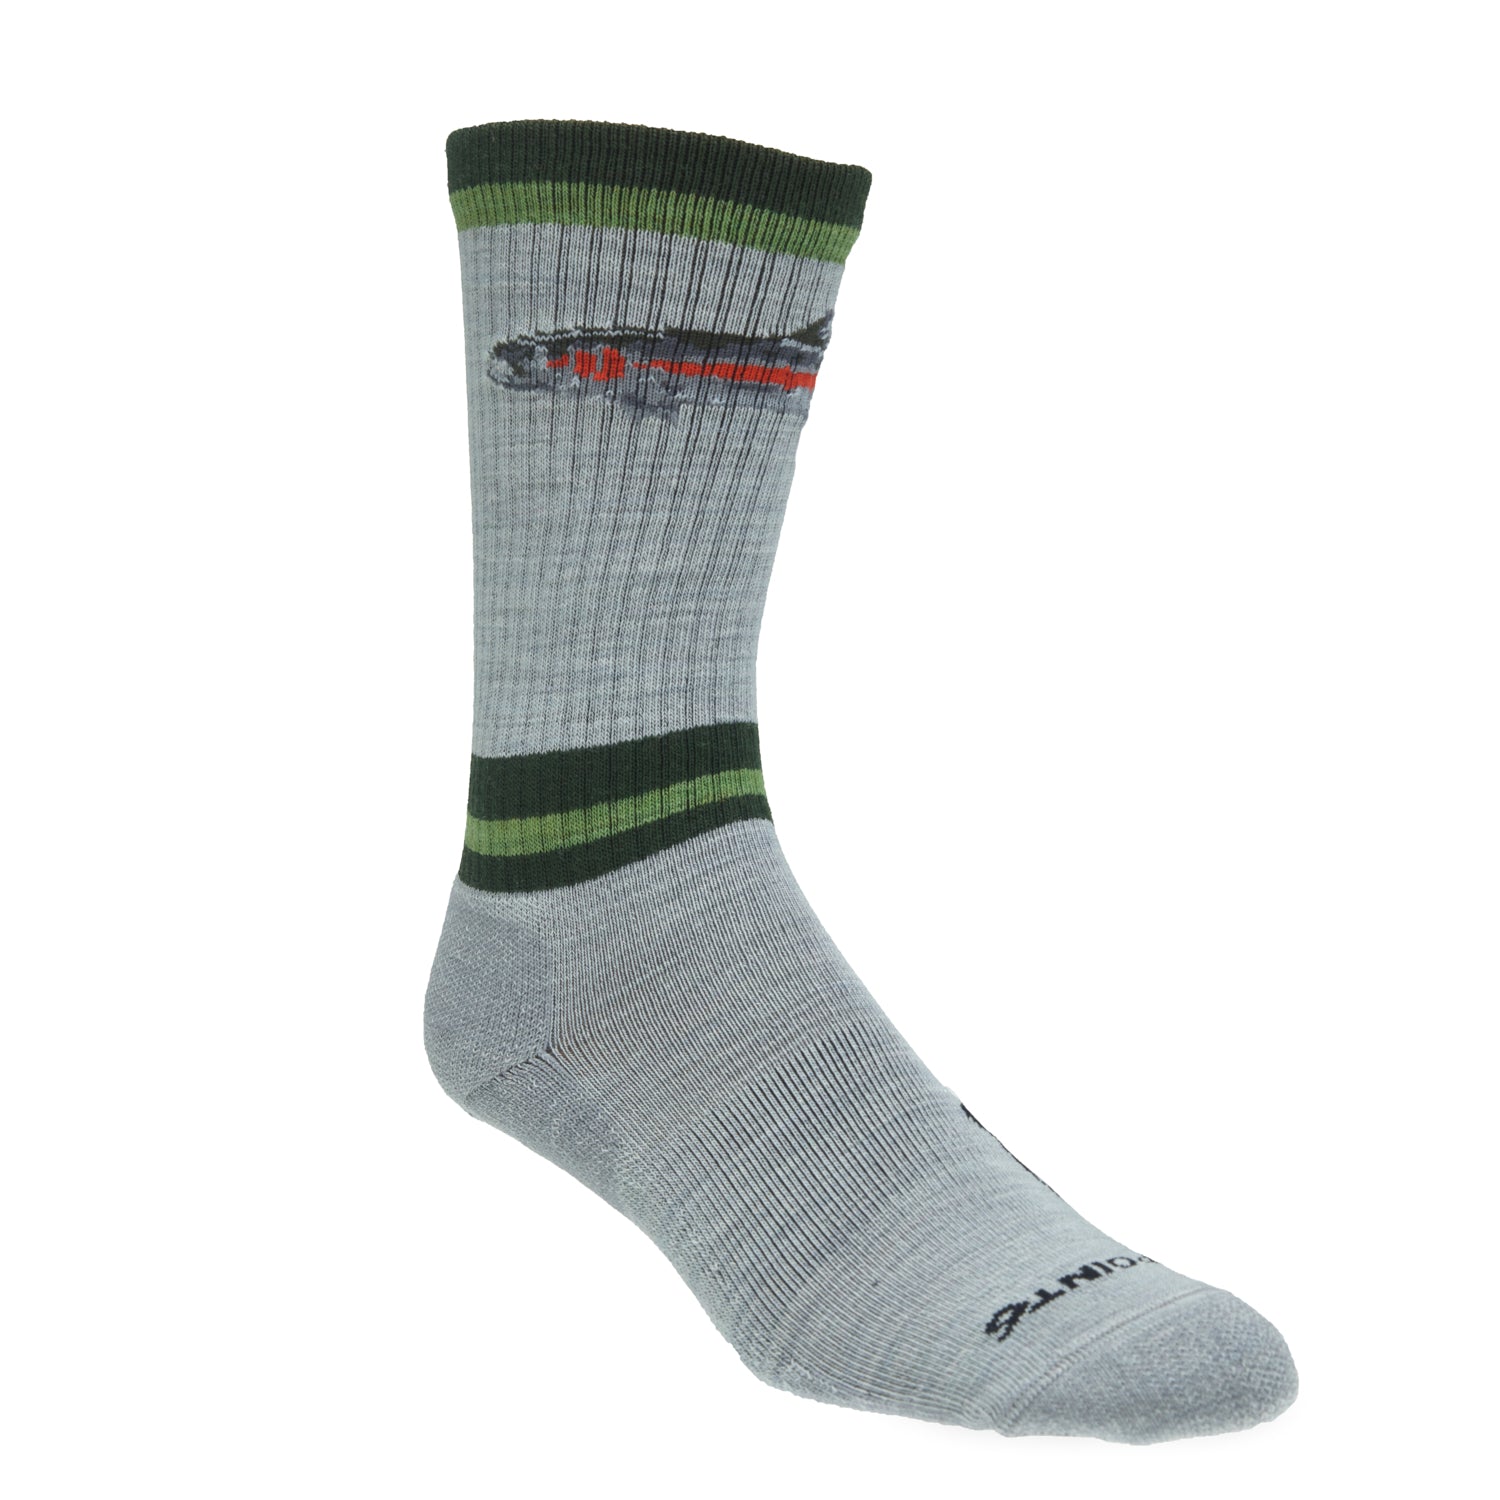 A light gray sock with green stripes and a rainbow trout on it.